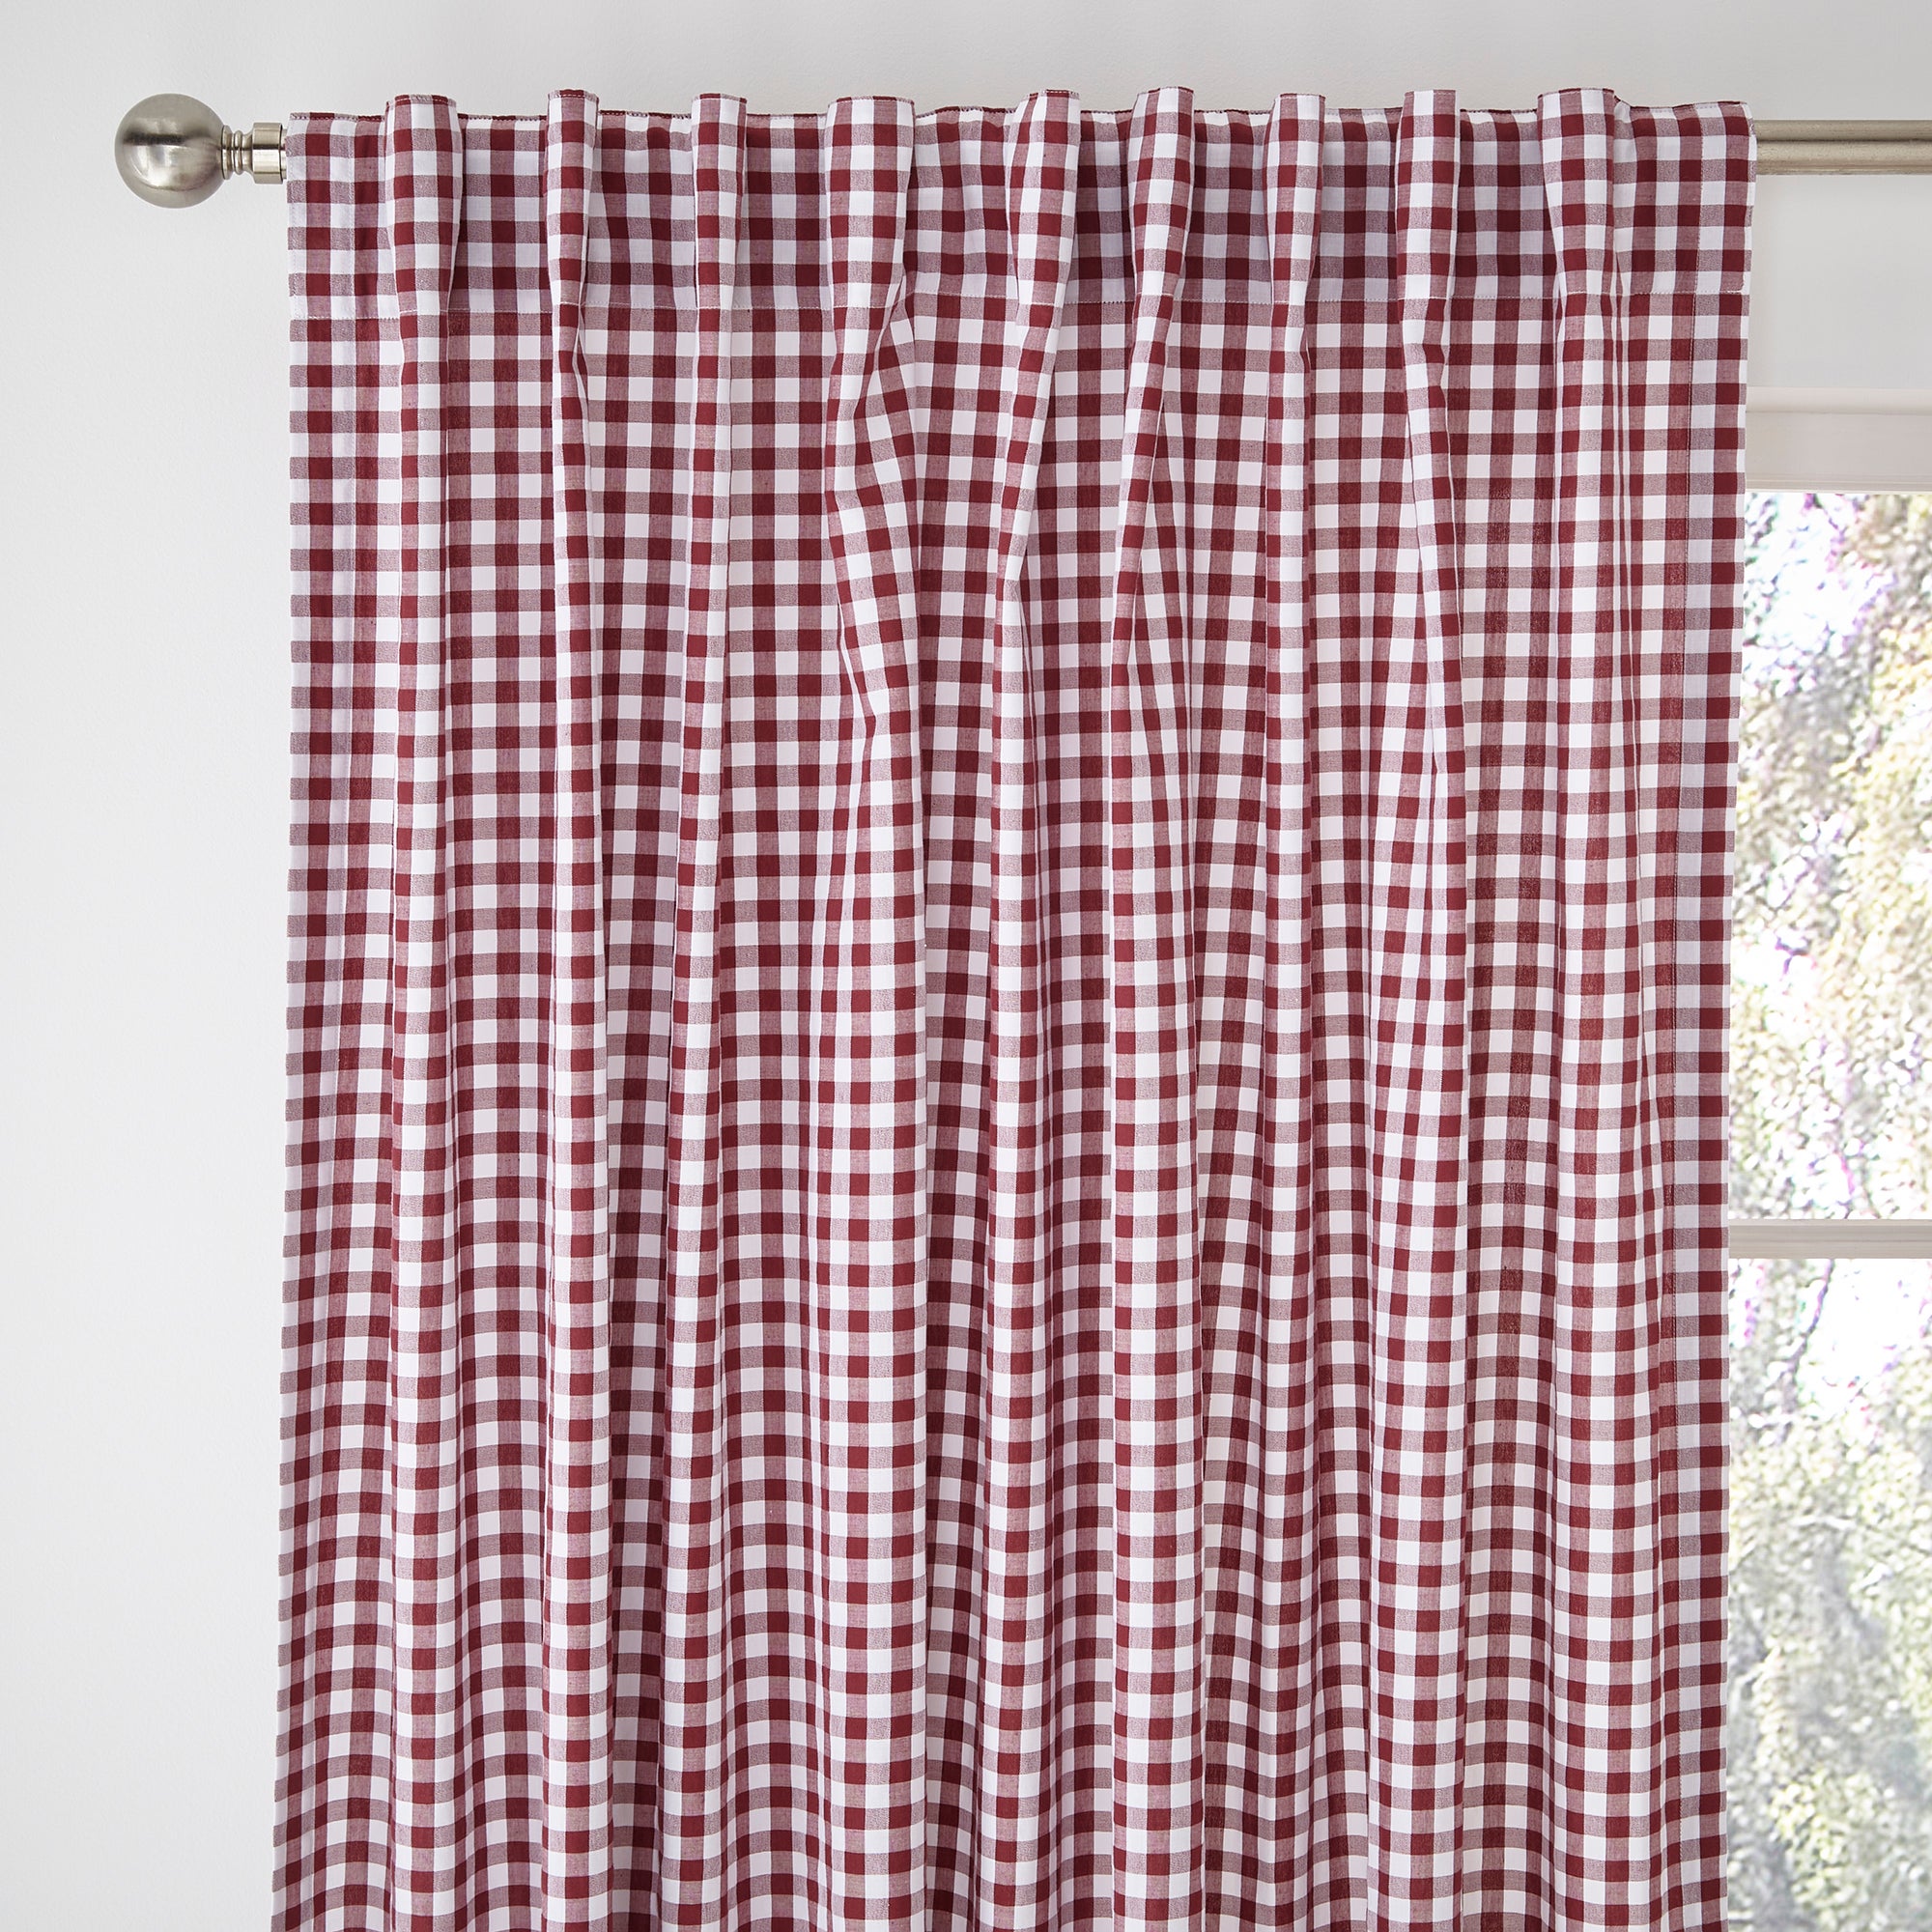 Voile & Net Curtains - Browse Our Full Range | Dunelm | Page 3